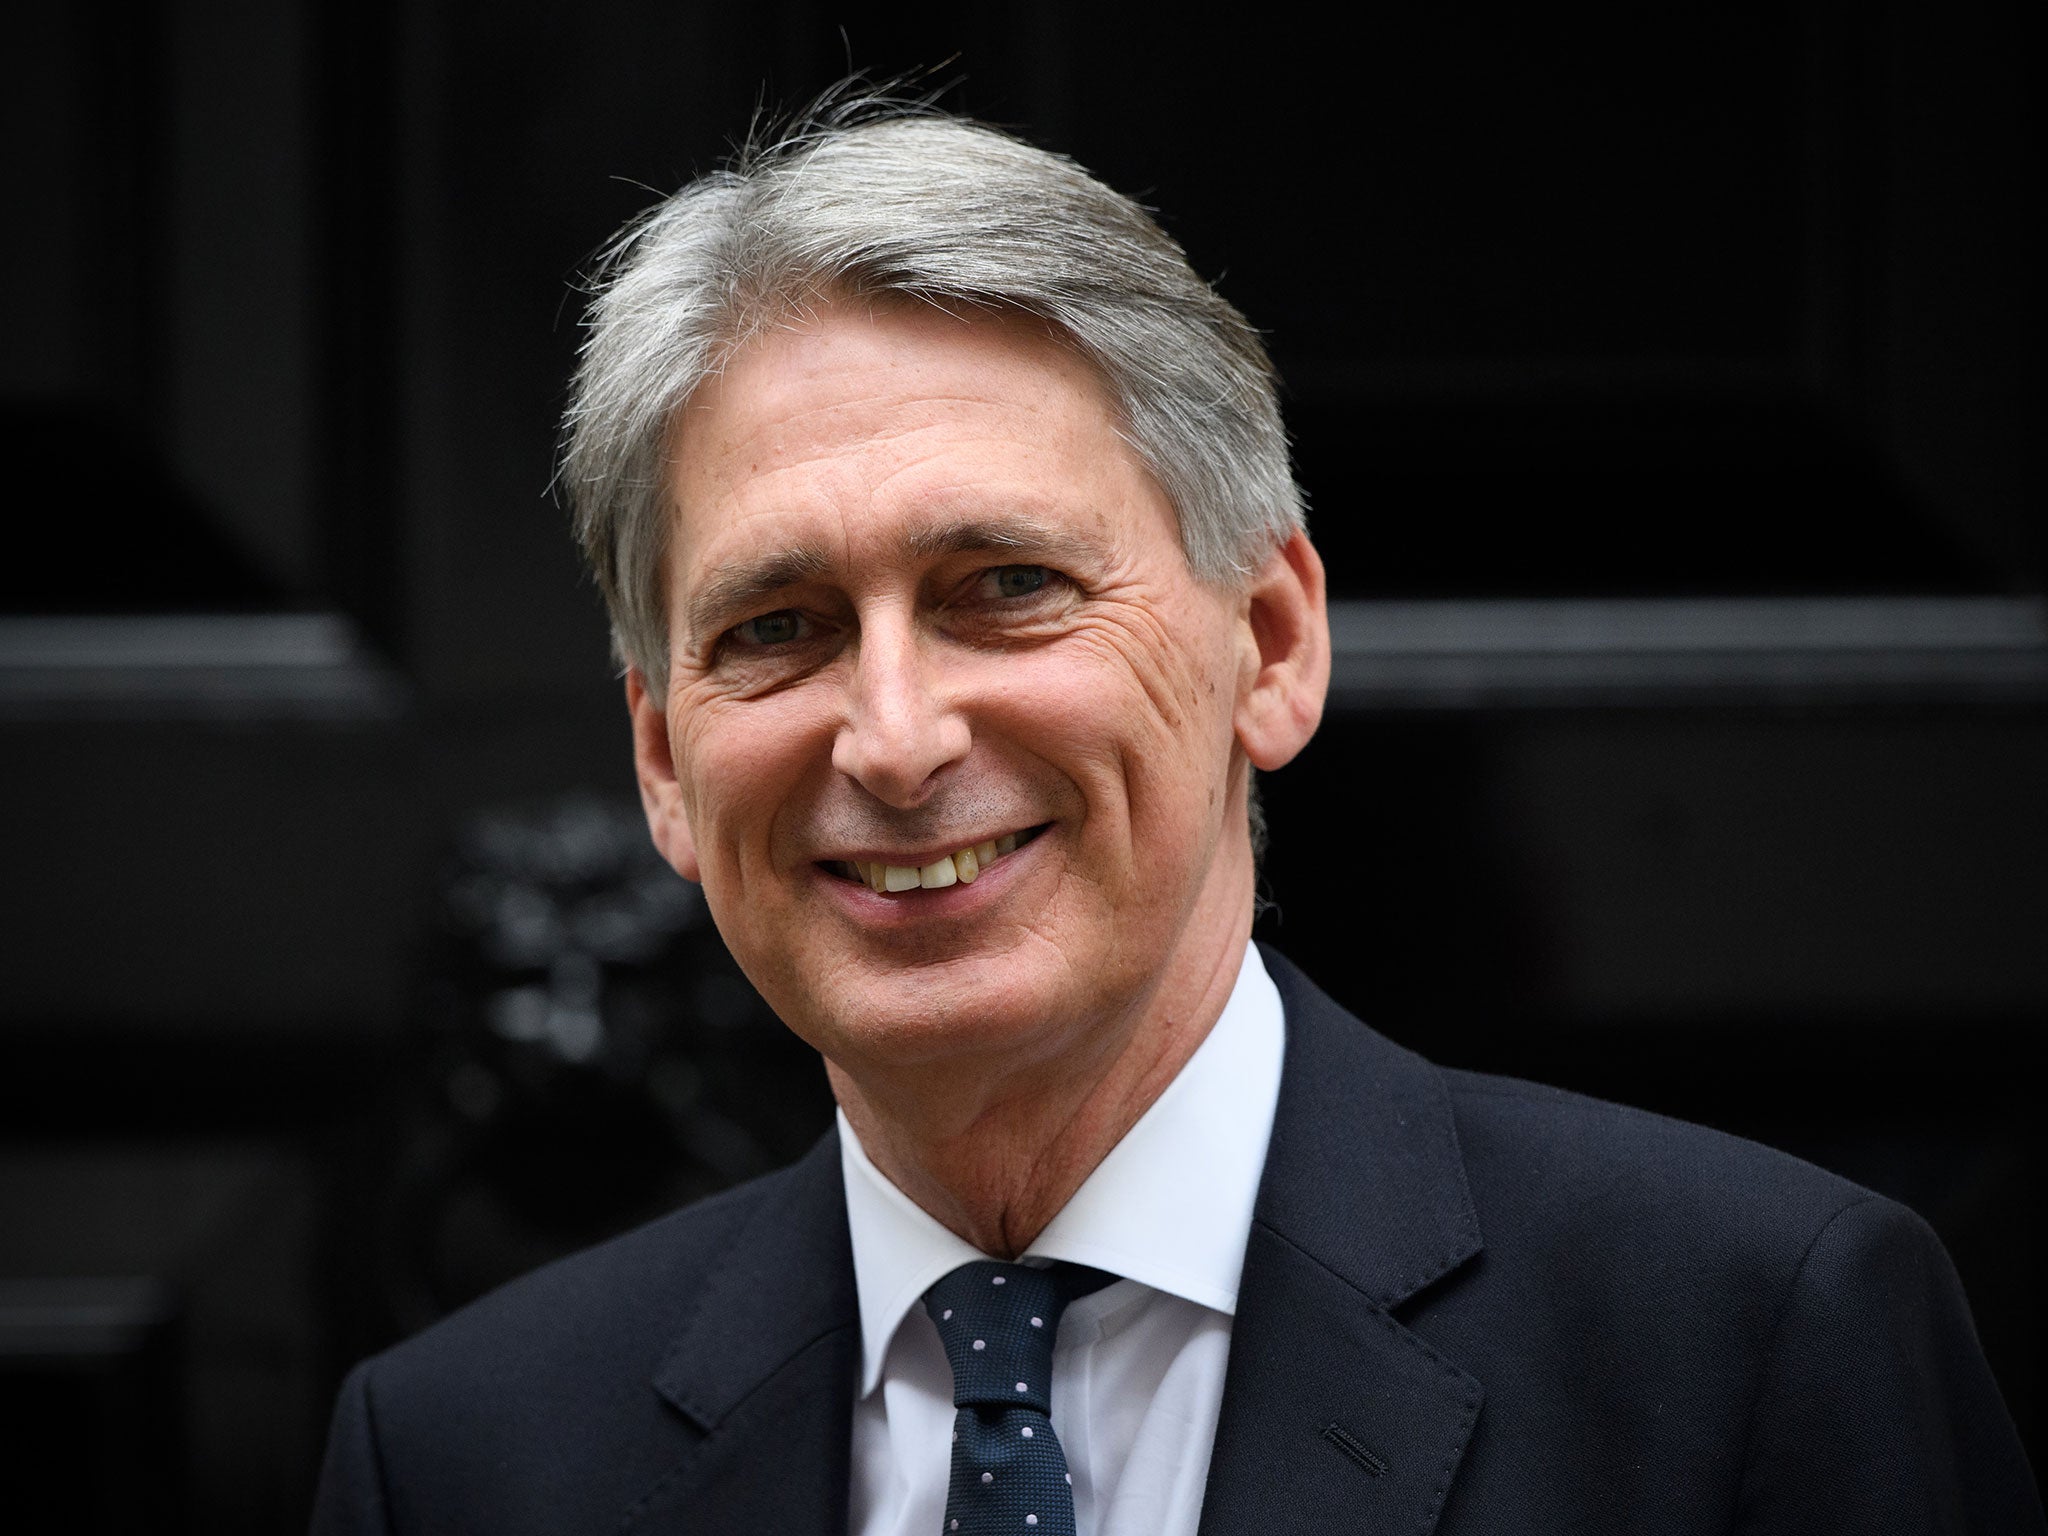 What better way for Hammond to start our new post-Brexit relationship with the rest of the world than changing the way we measure our wealth?